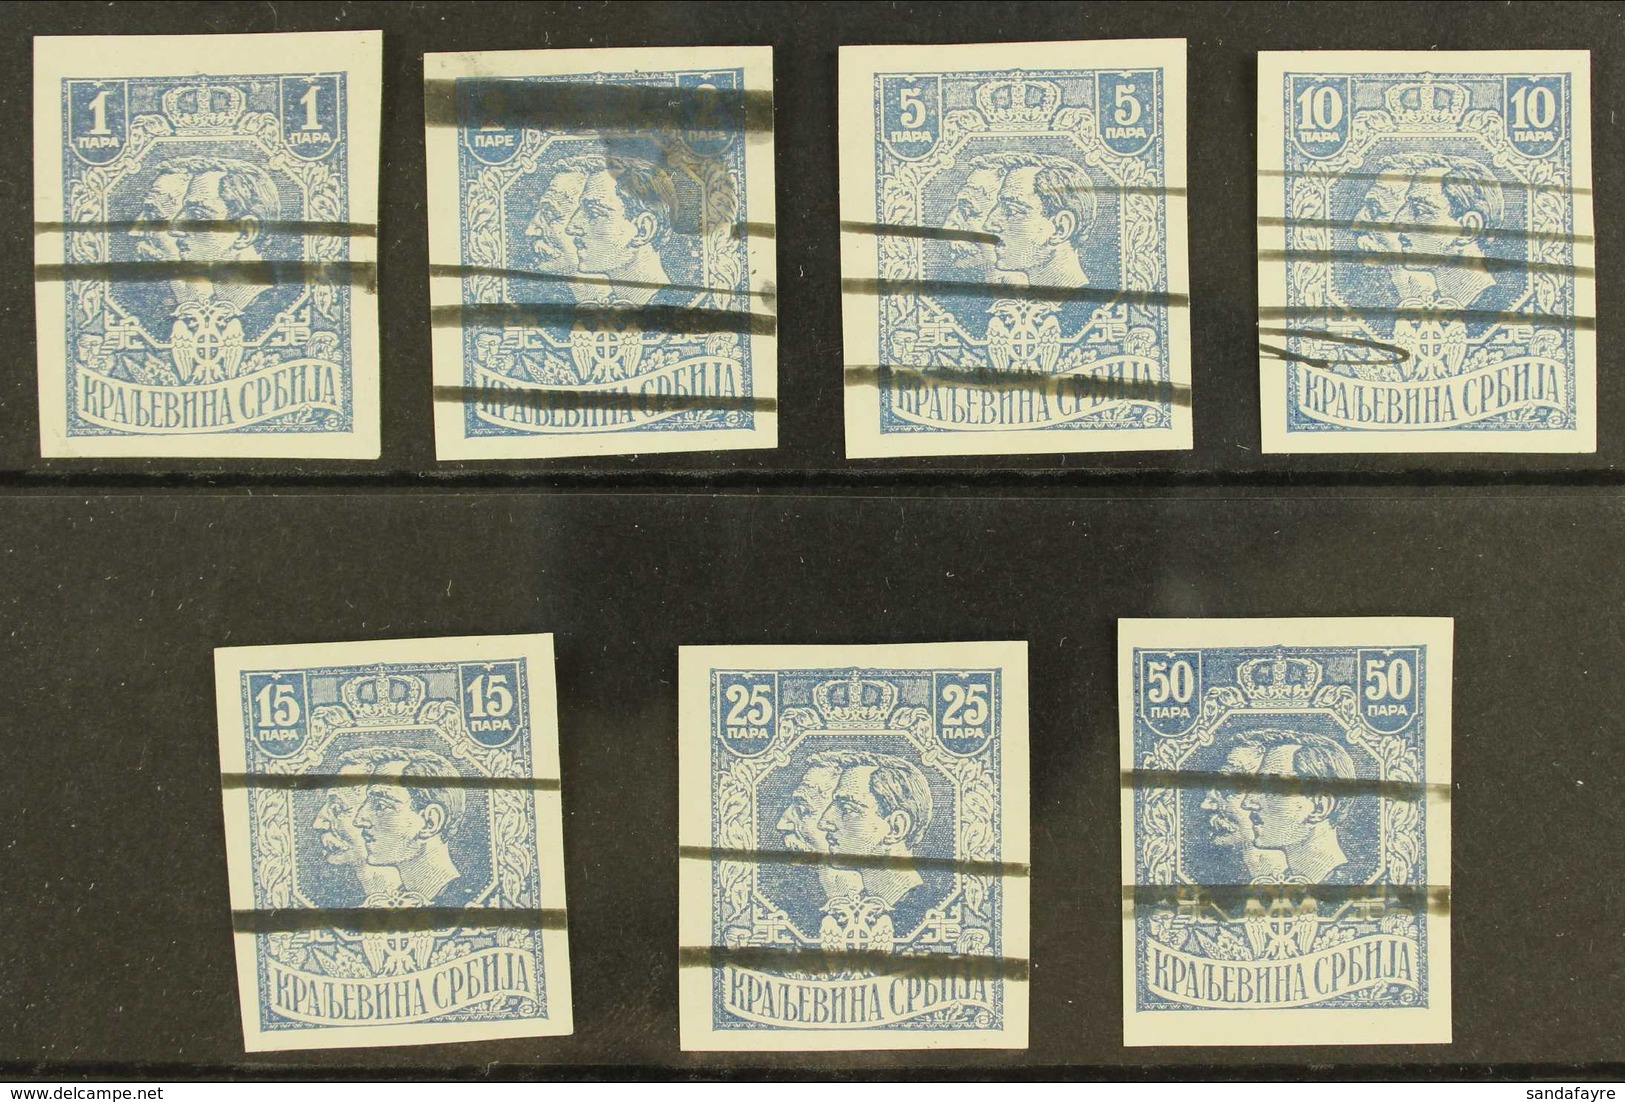 1918 IMPERF PROOFS For The 'King Petar & Prince Alexander' Due Design (as SG 194/226) - Seven Different Values Printed I - Serbie